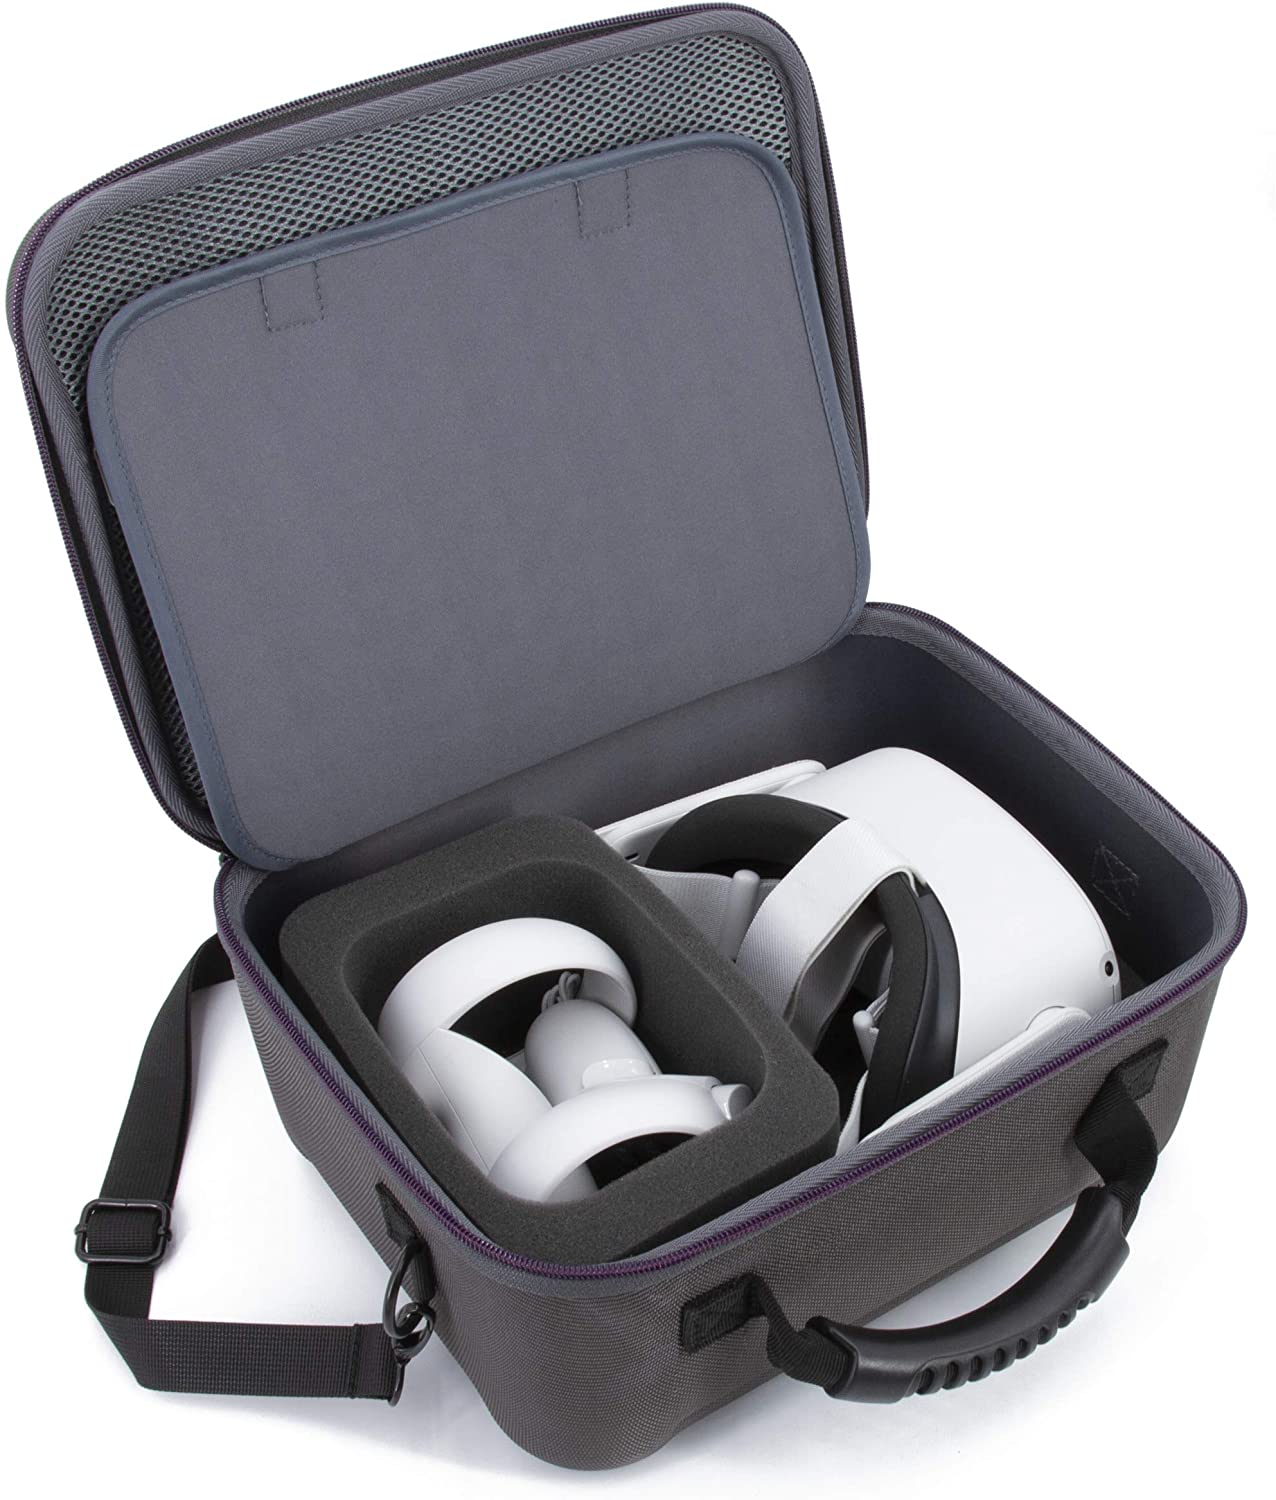 Rend Ugle for mig CASEMATIX Hard Shell Travel Case Compatible with Oculus Quest 2 -  Protective Oculus Quest 2 Case with Impact-Absorbing Foam and Shoulder  Strap | Lightweight & Affordable Hard Cases For Microphones, Guns, PS5s &  More